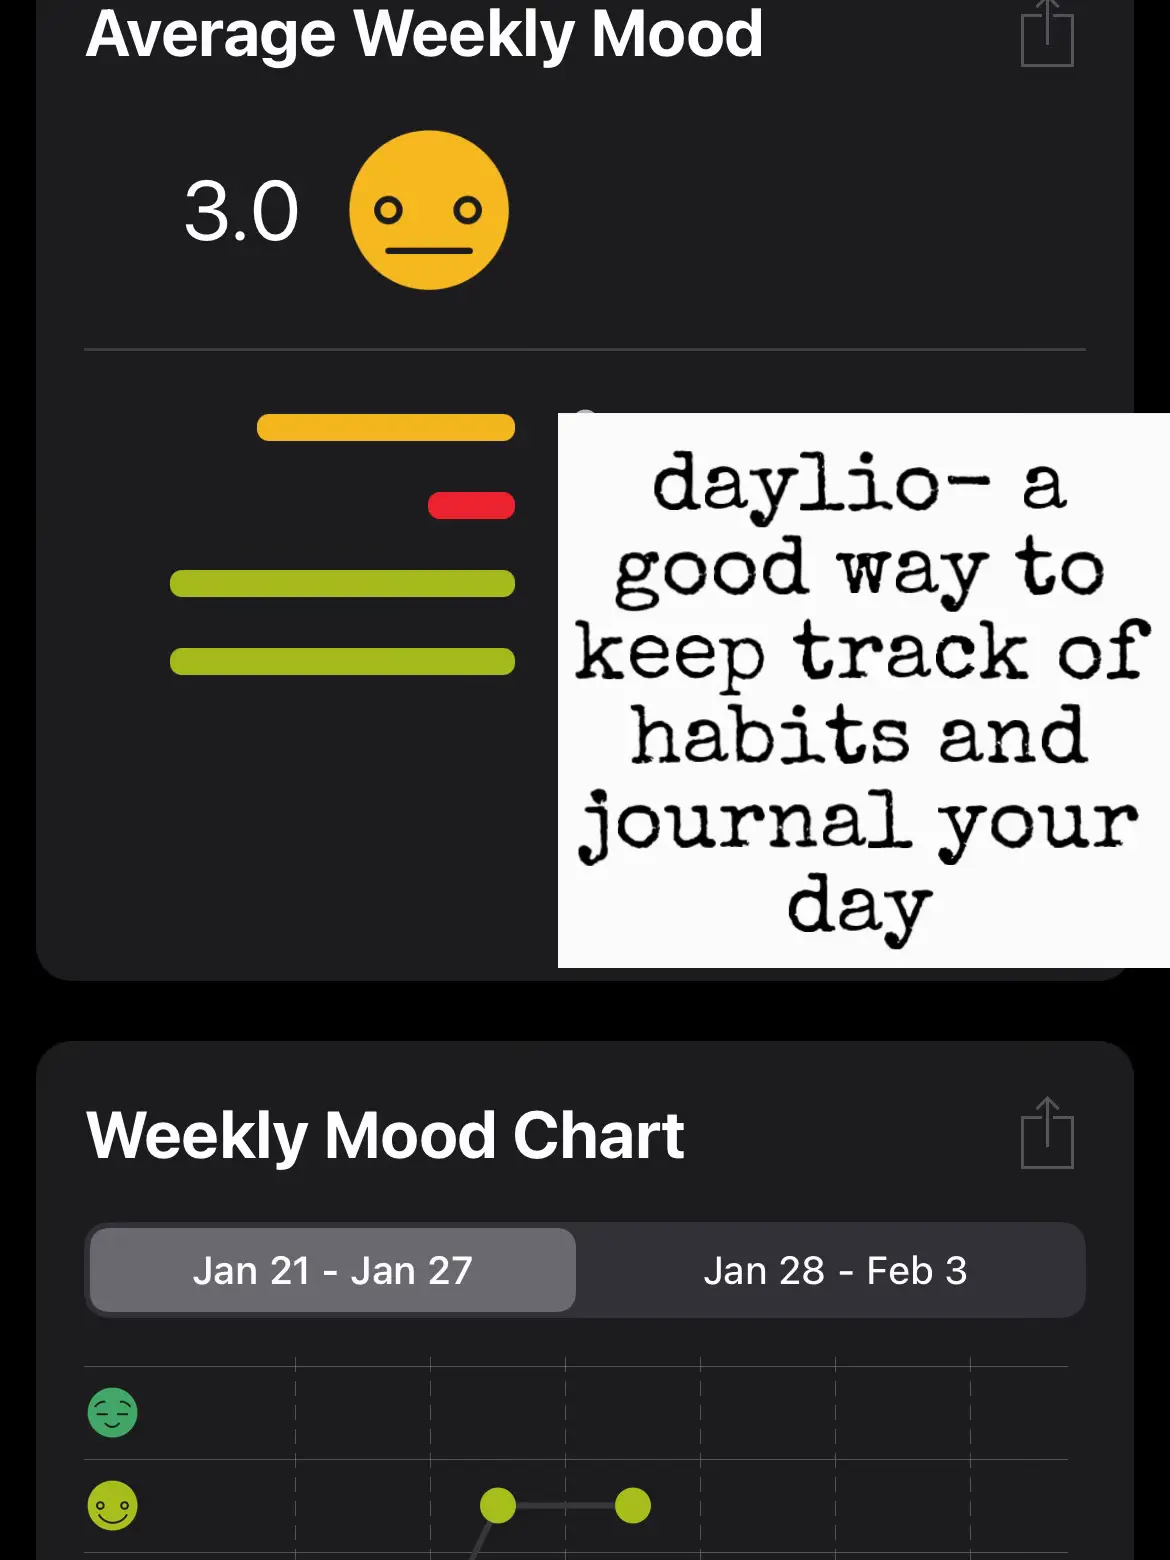  A weekly mood chart with the date of the month